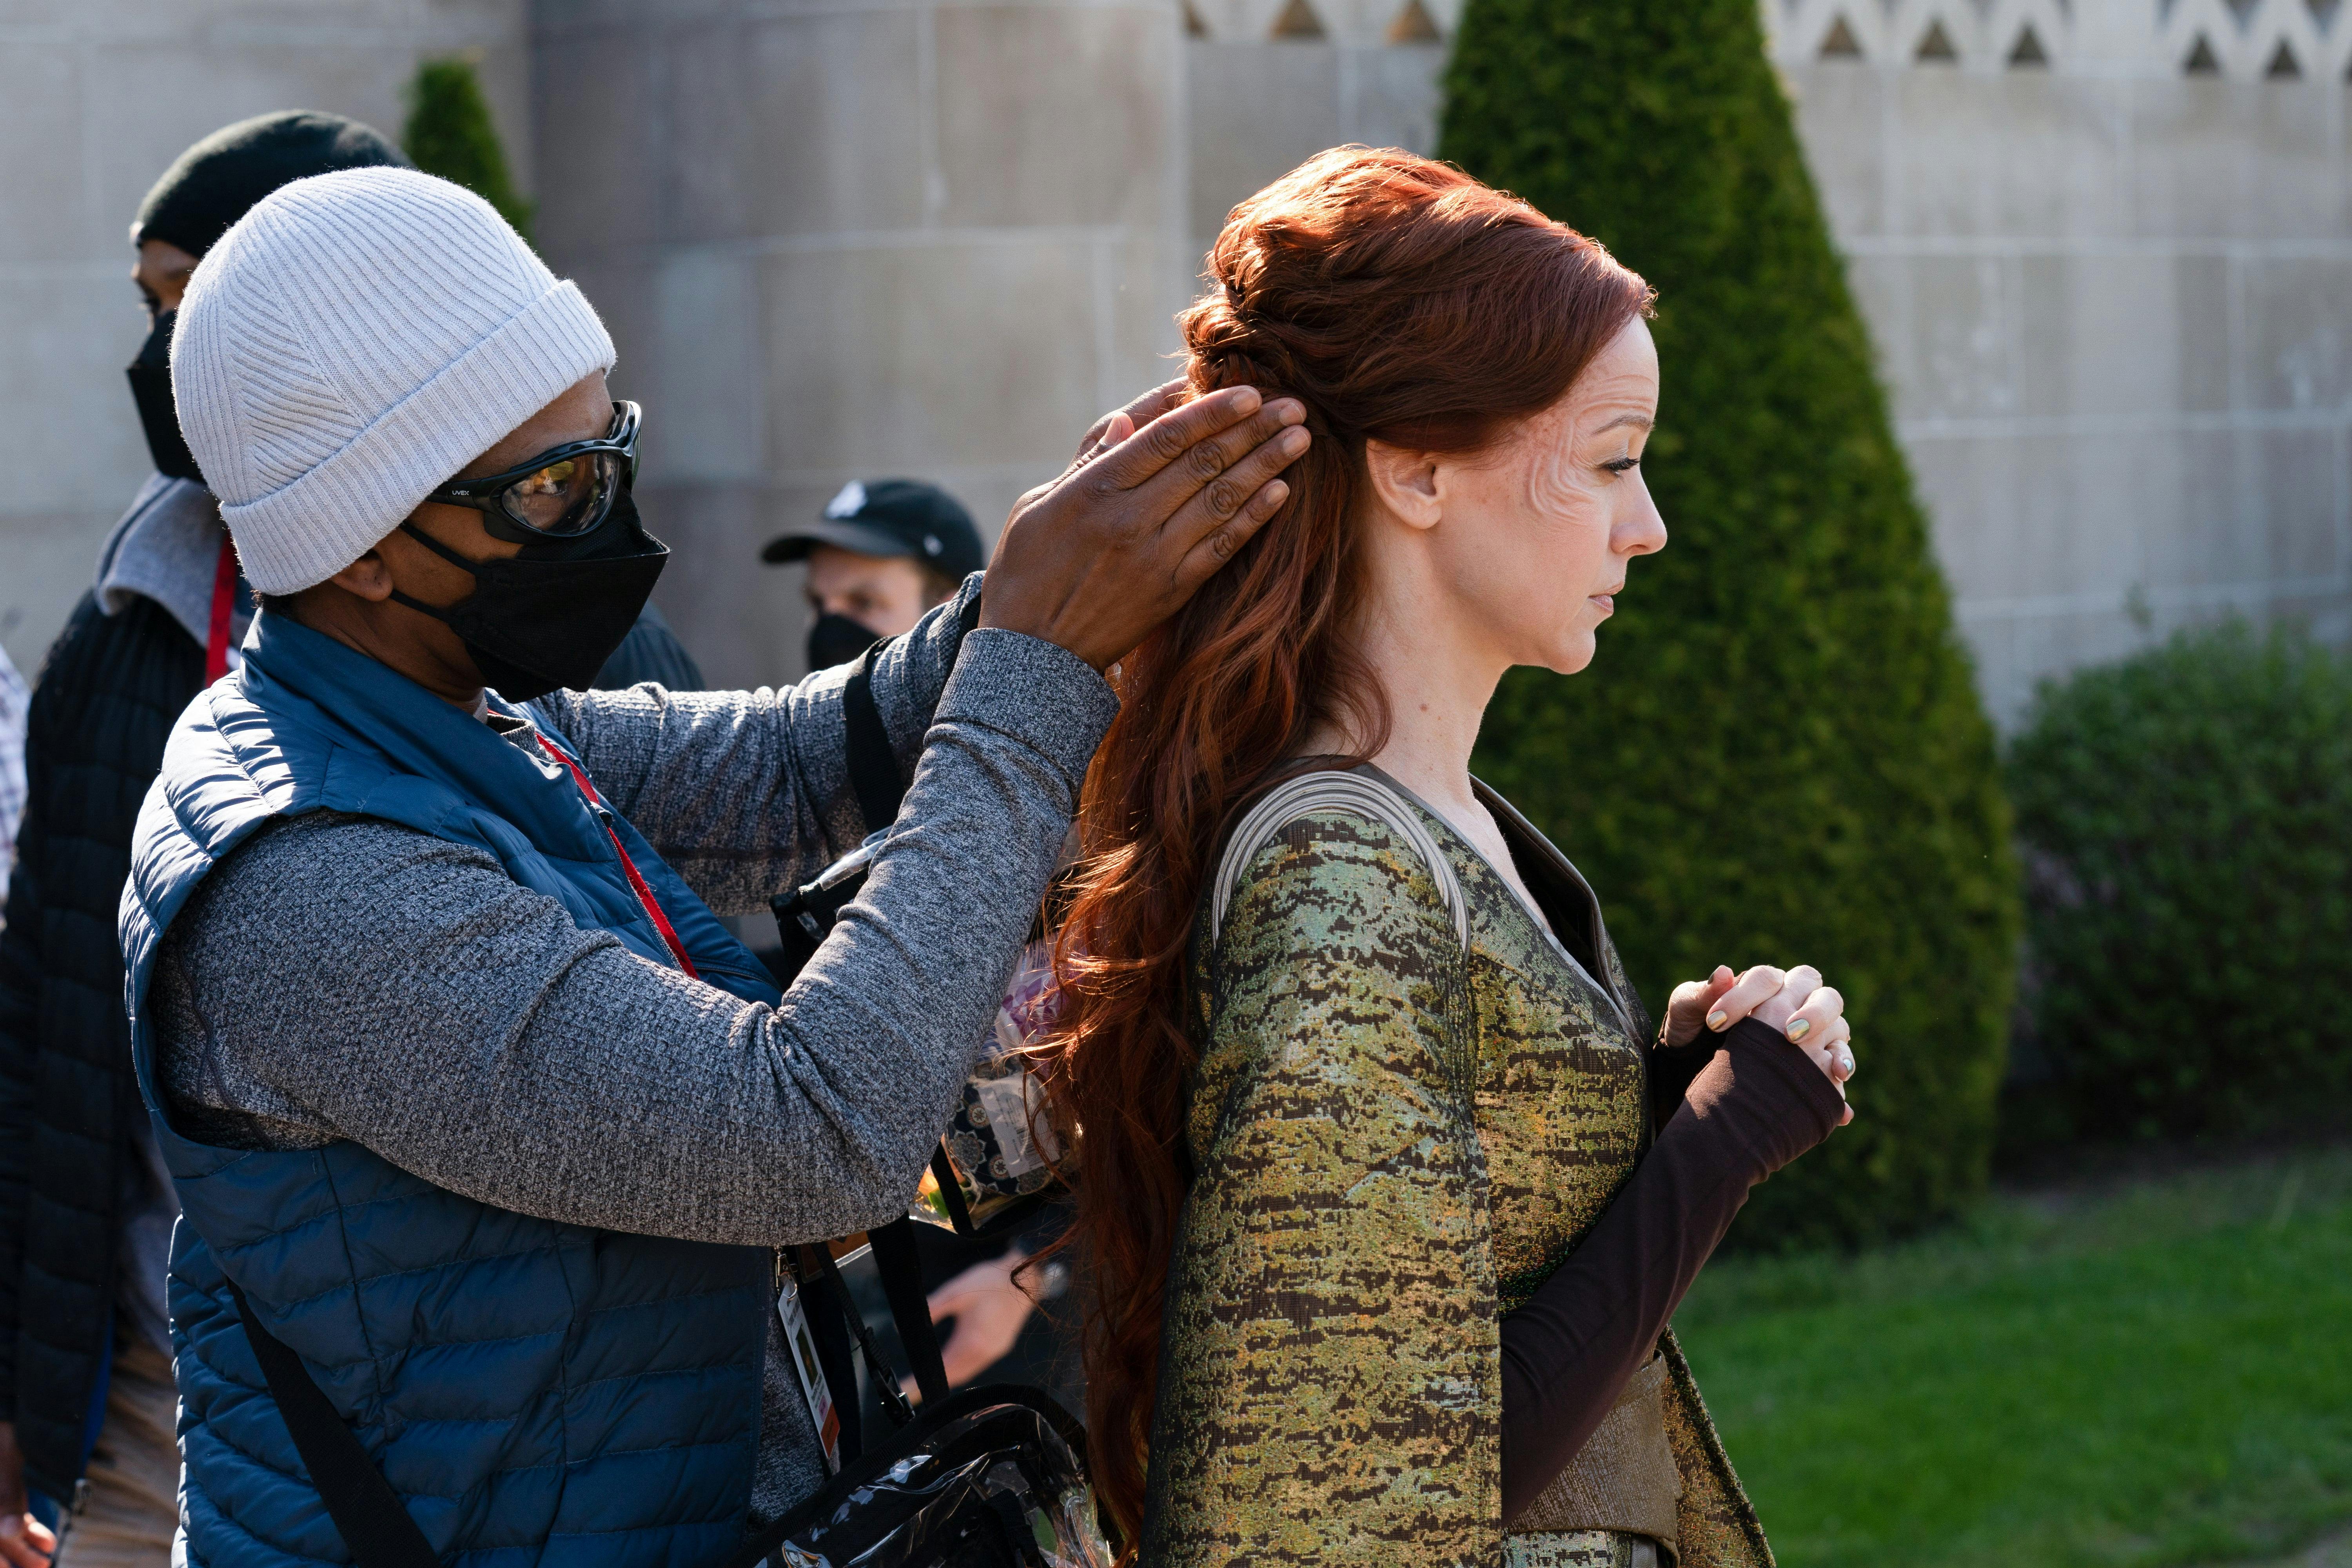 A crew member fixes Lindy Booth's (Alora) hair before a shot.